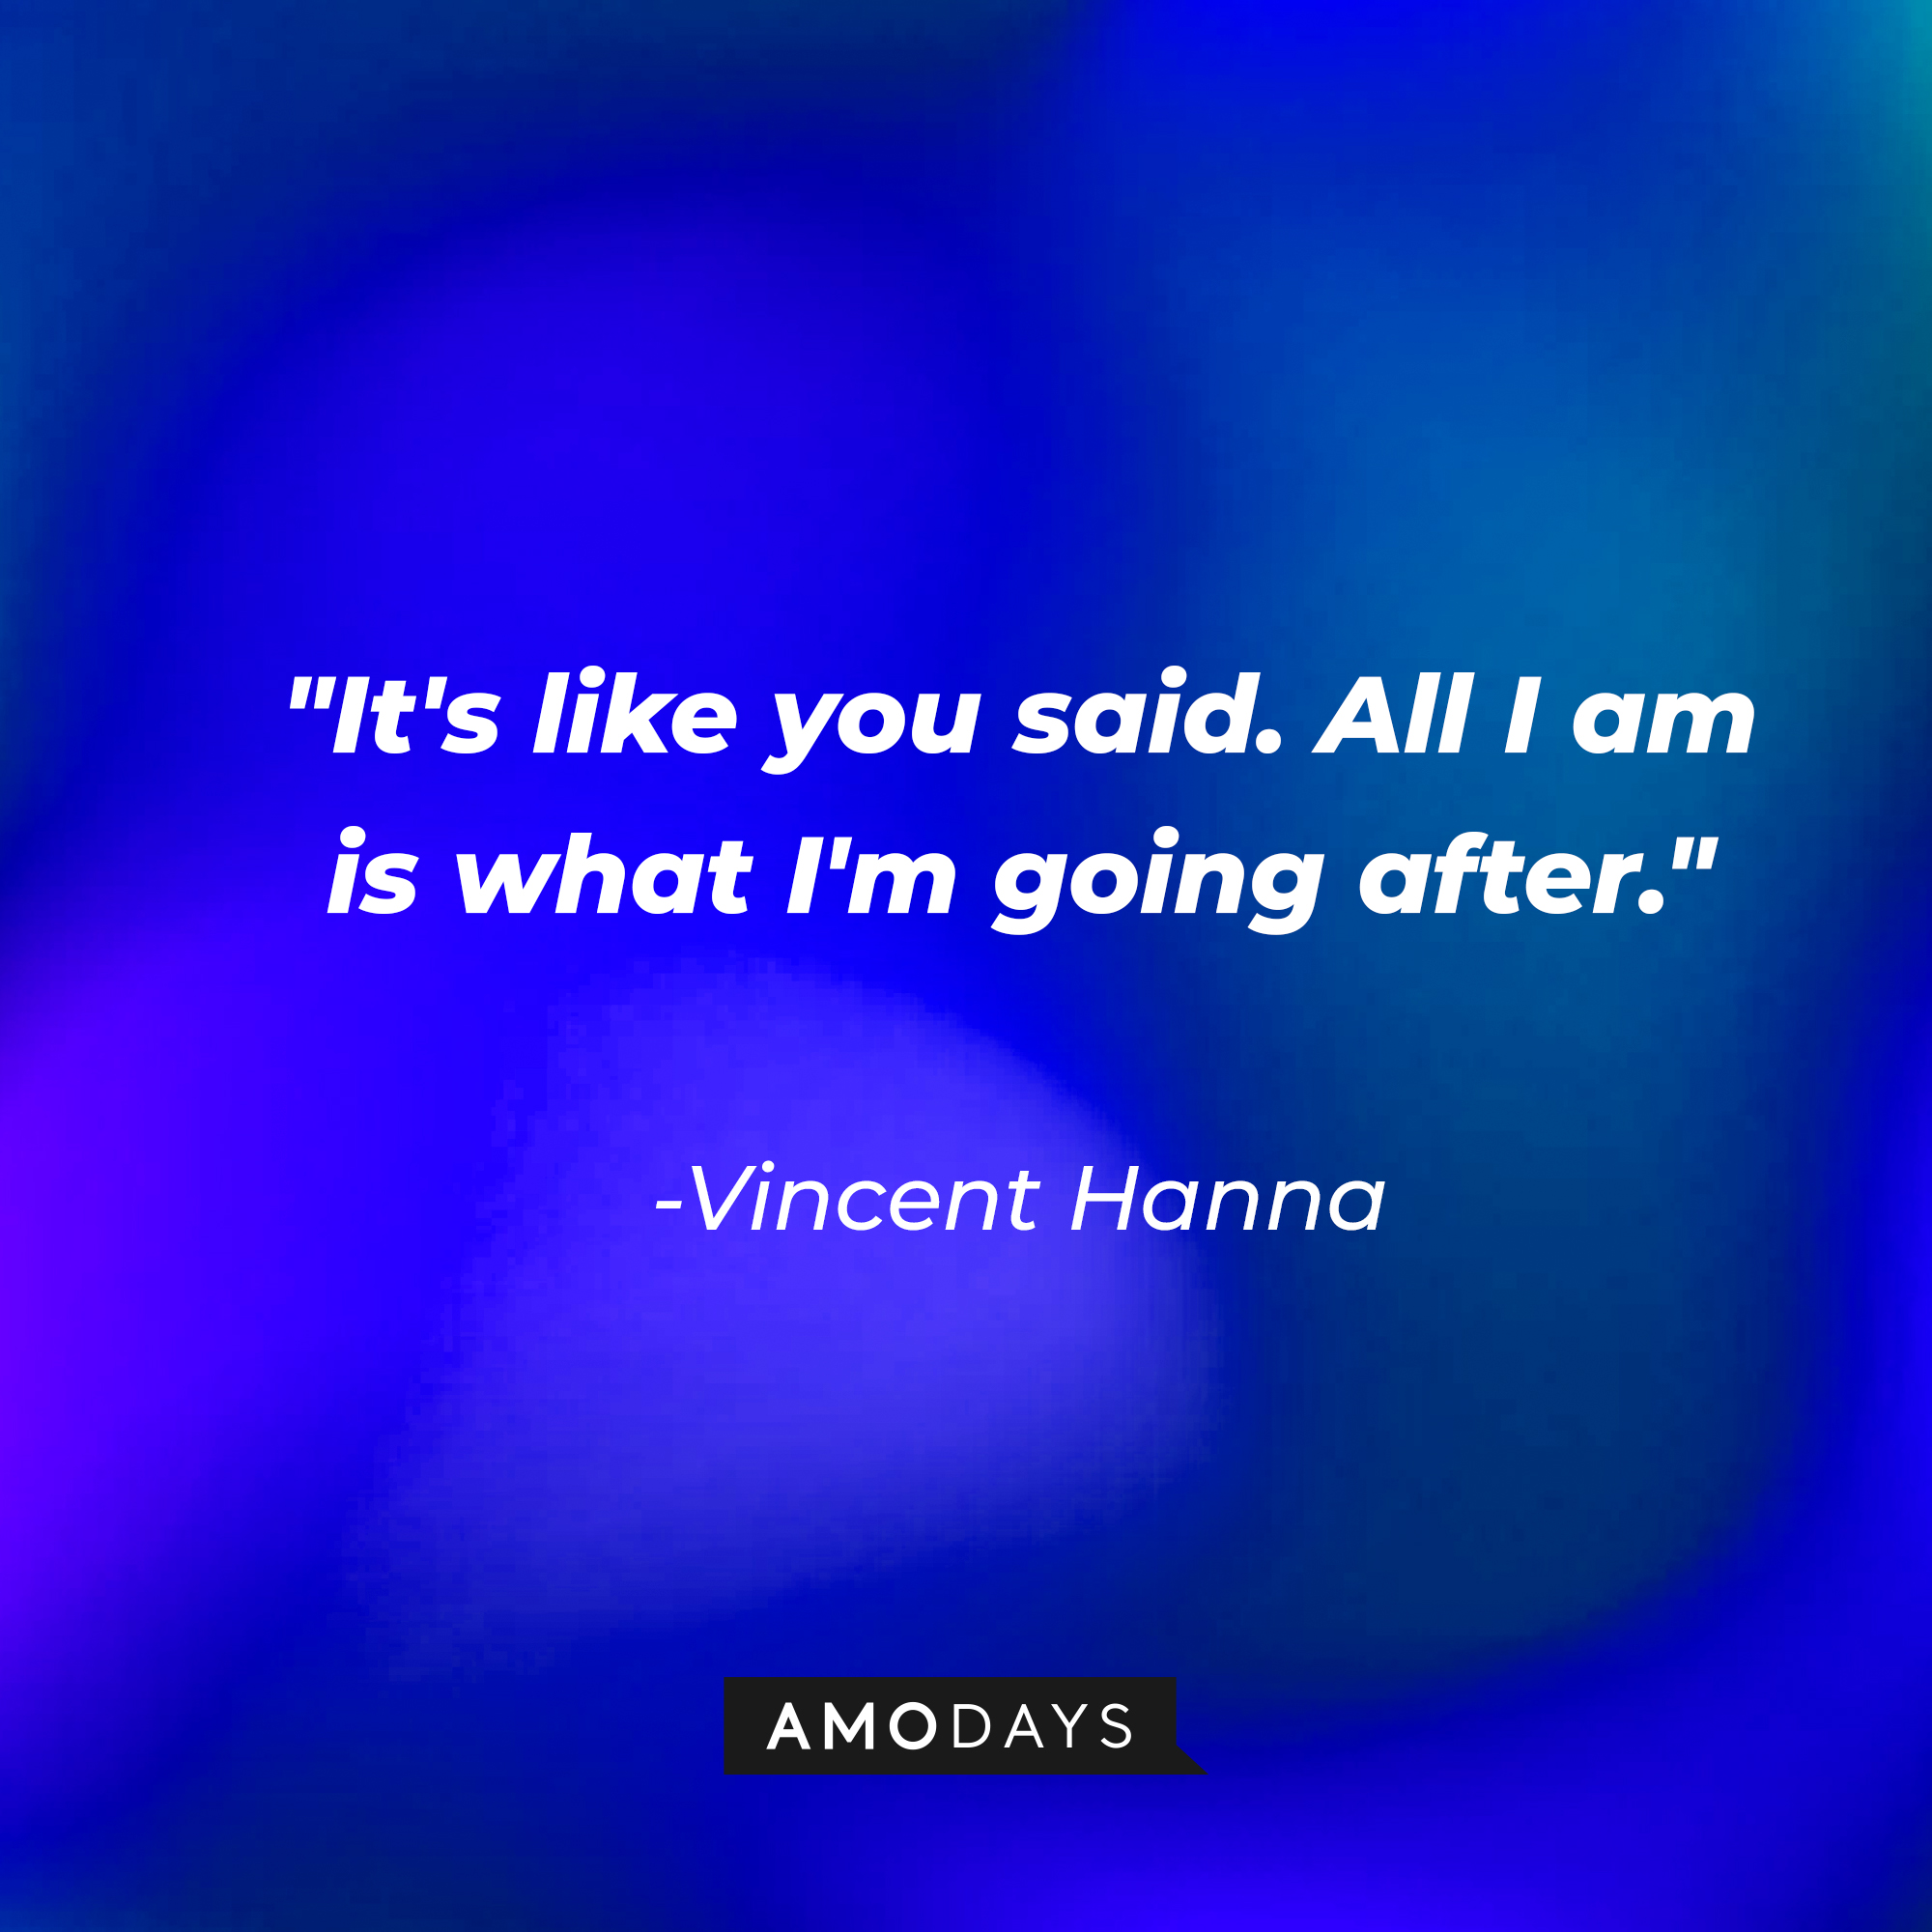 Vincent Hanna's quote: "It's like you said. All I am is what I'm going after." | Source: AmoDays